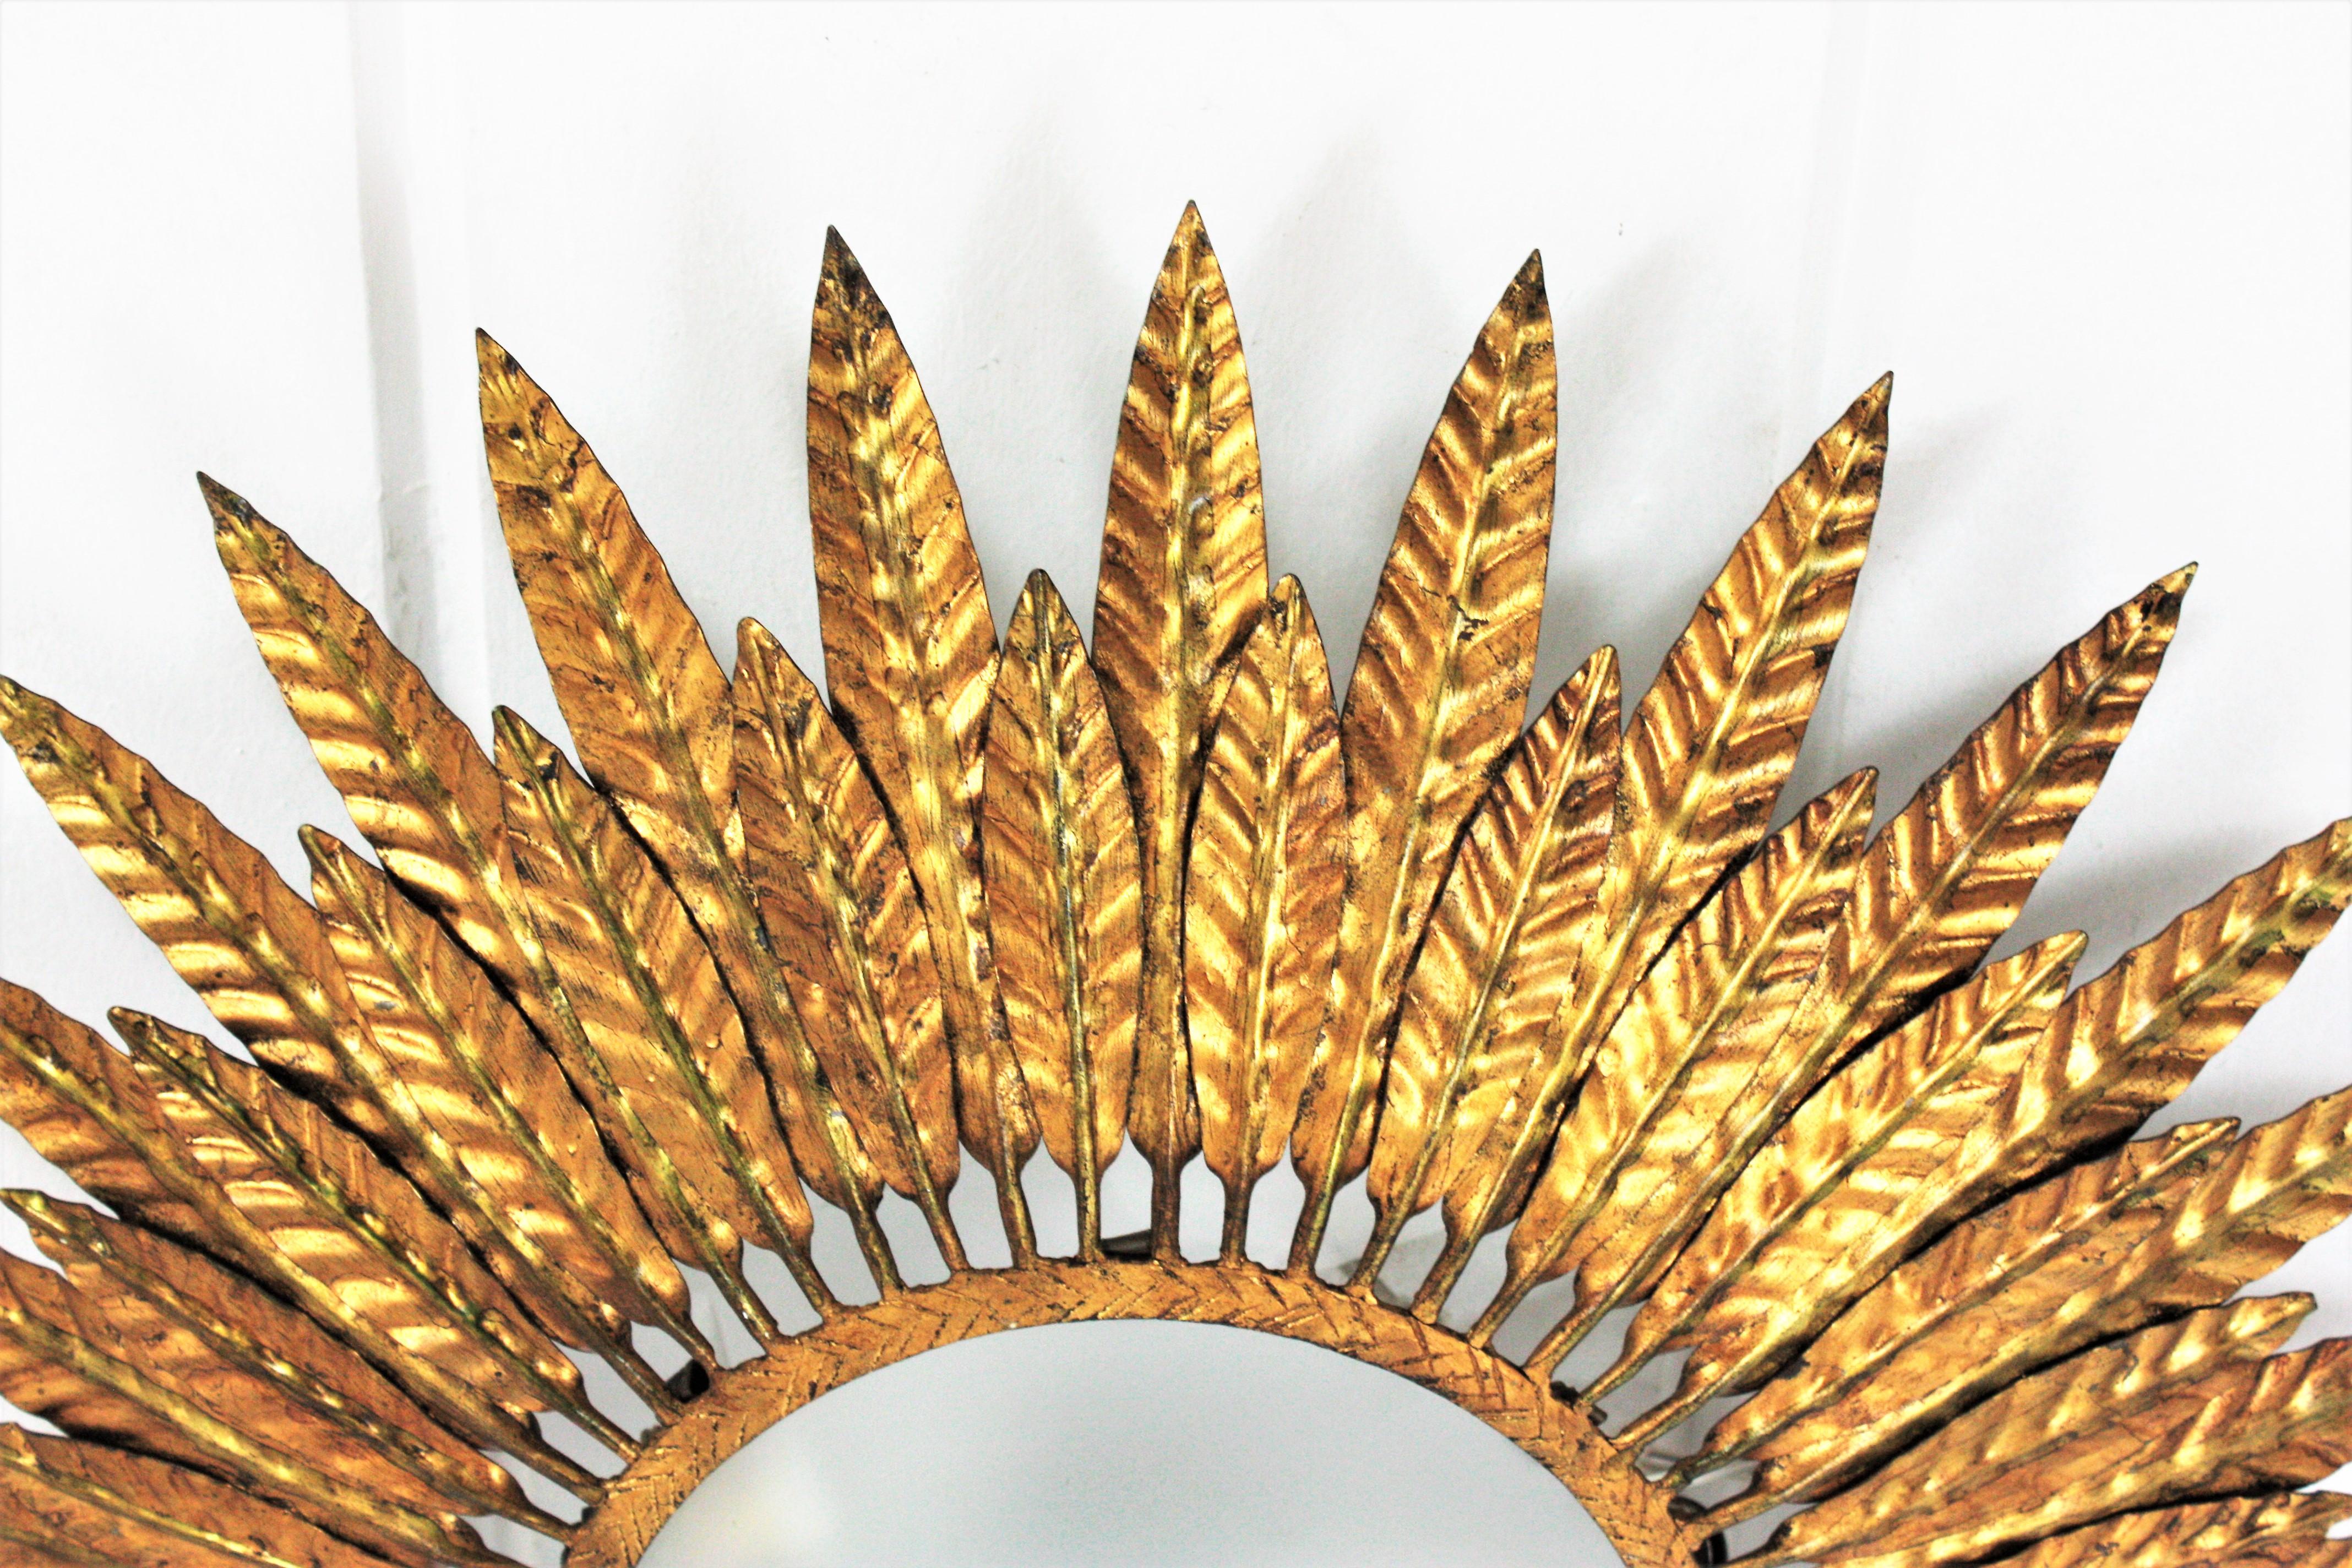 20th Century Gilt Iron Sunburst Leafed Light Fixture with Frosted Glass, Spain, 1950s For Sale